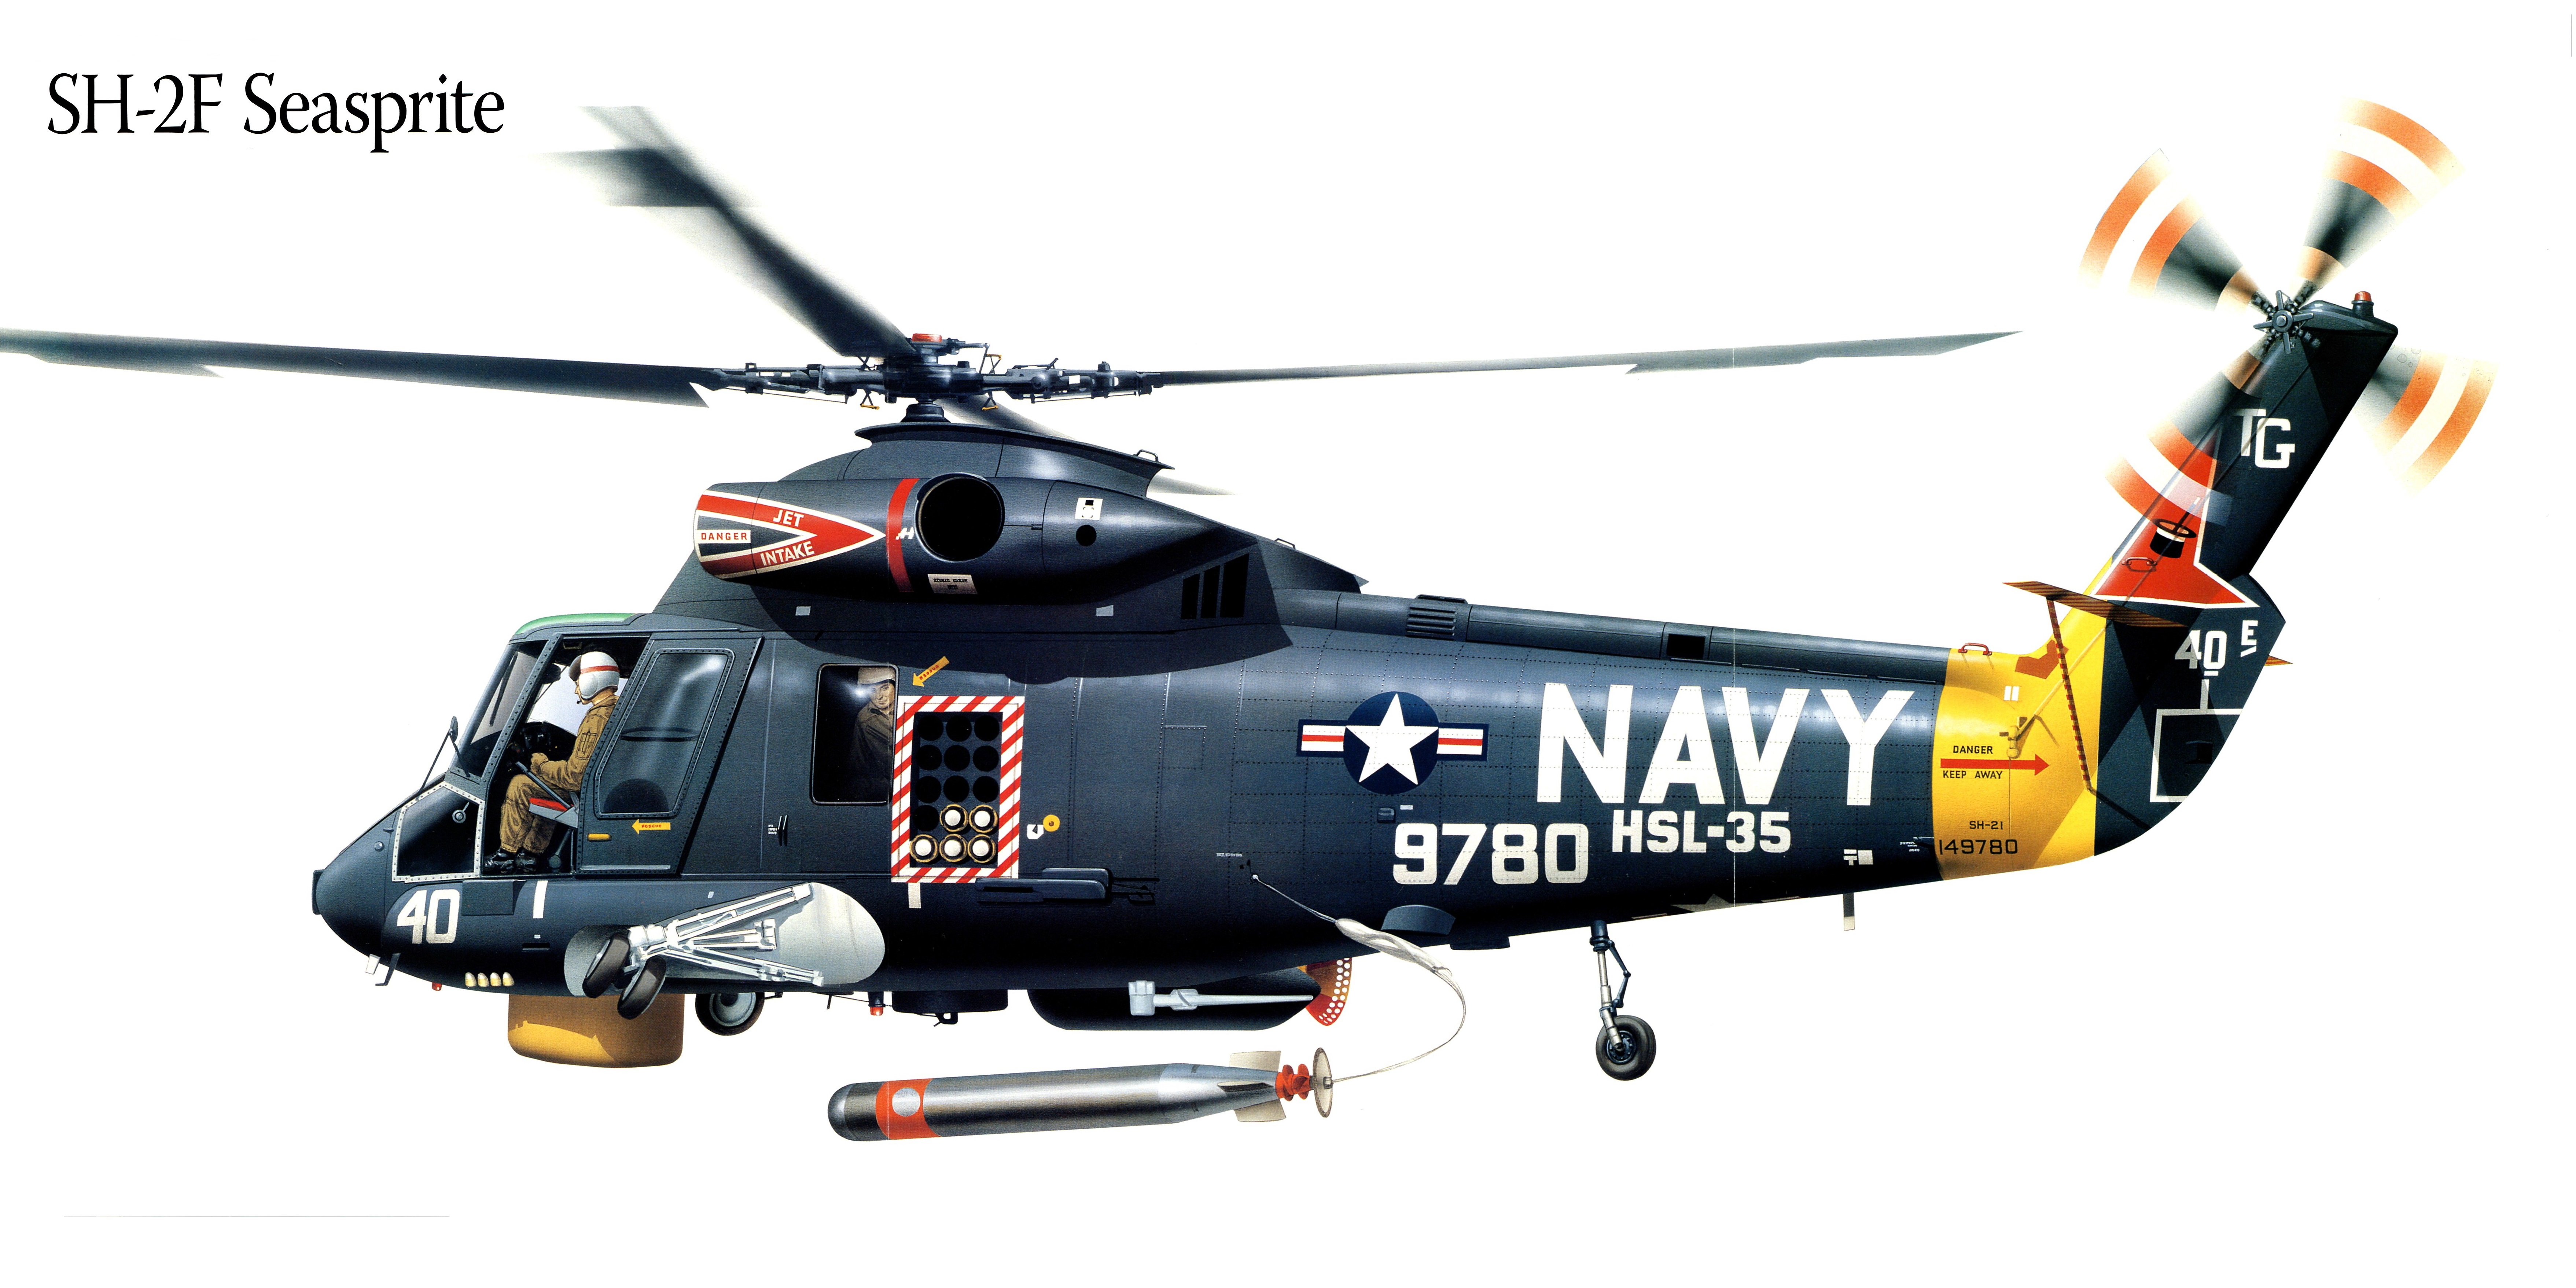 sh 2f, Seasprite, Military, Helicopter, Aircraft Wallpaper